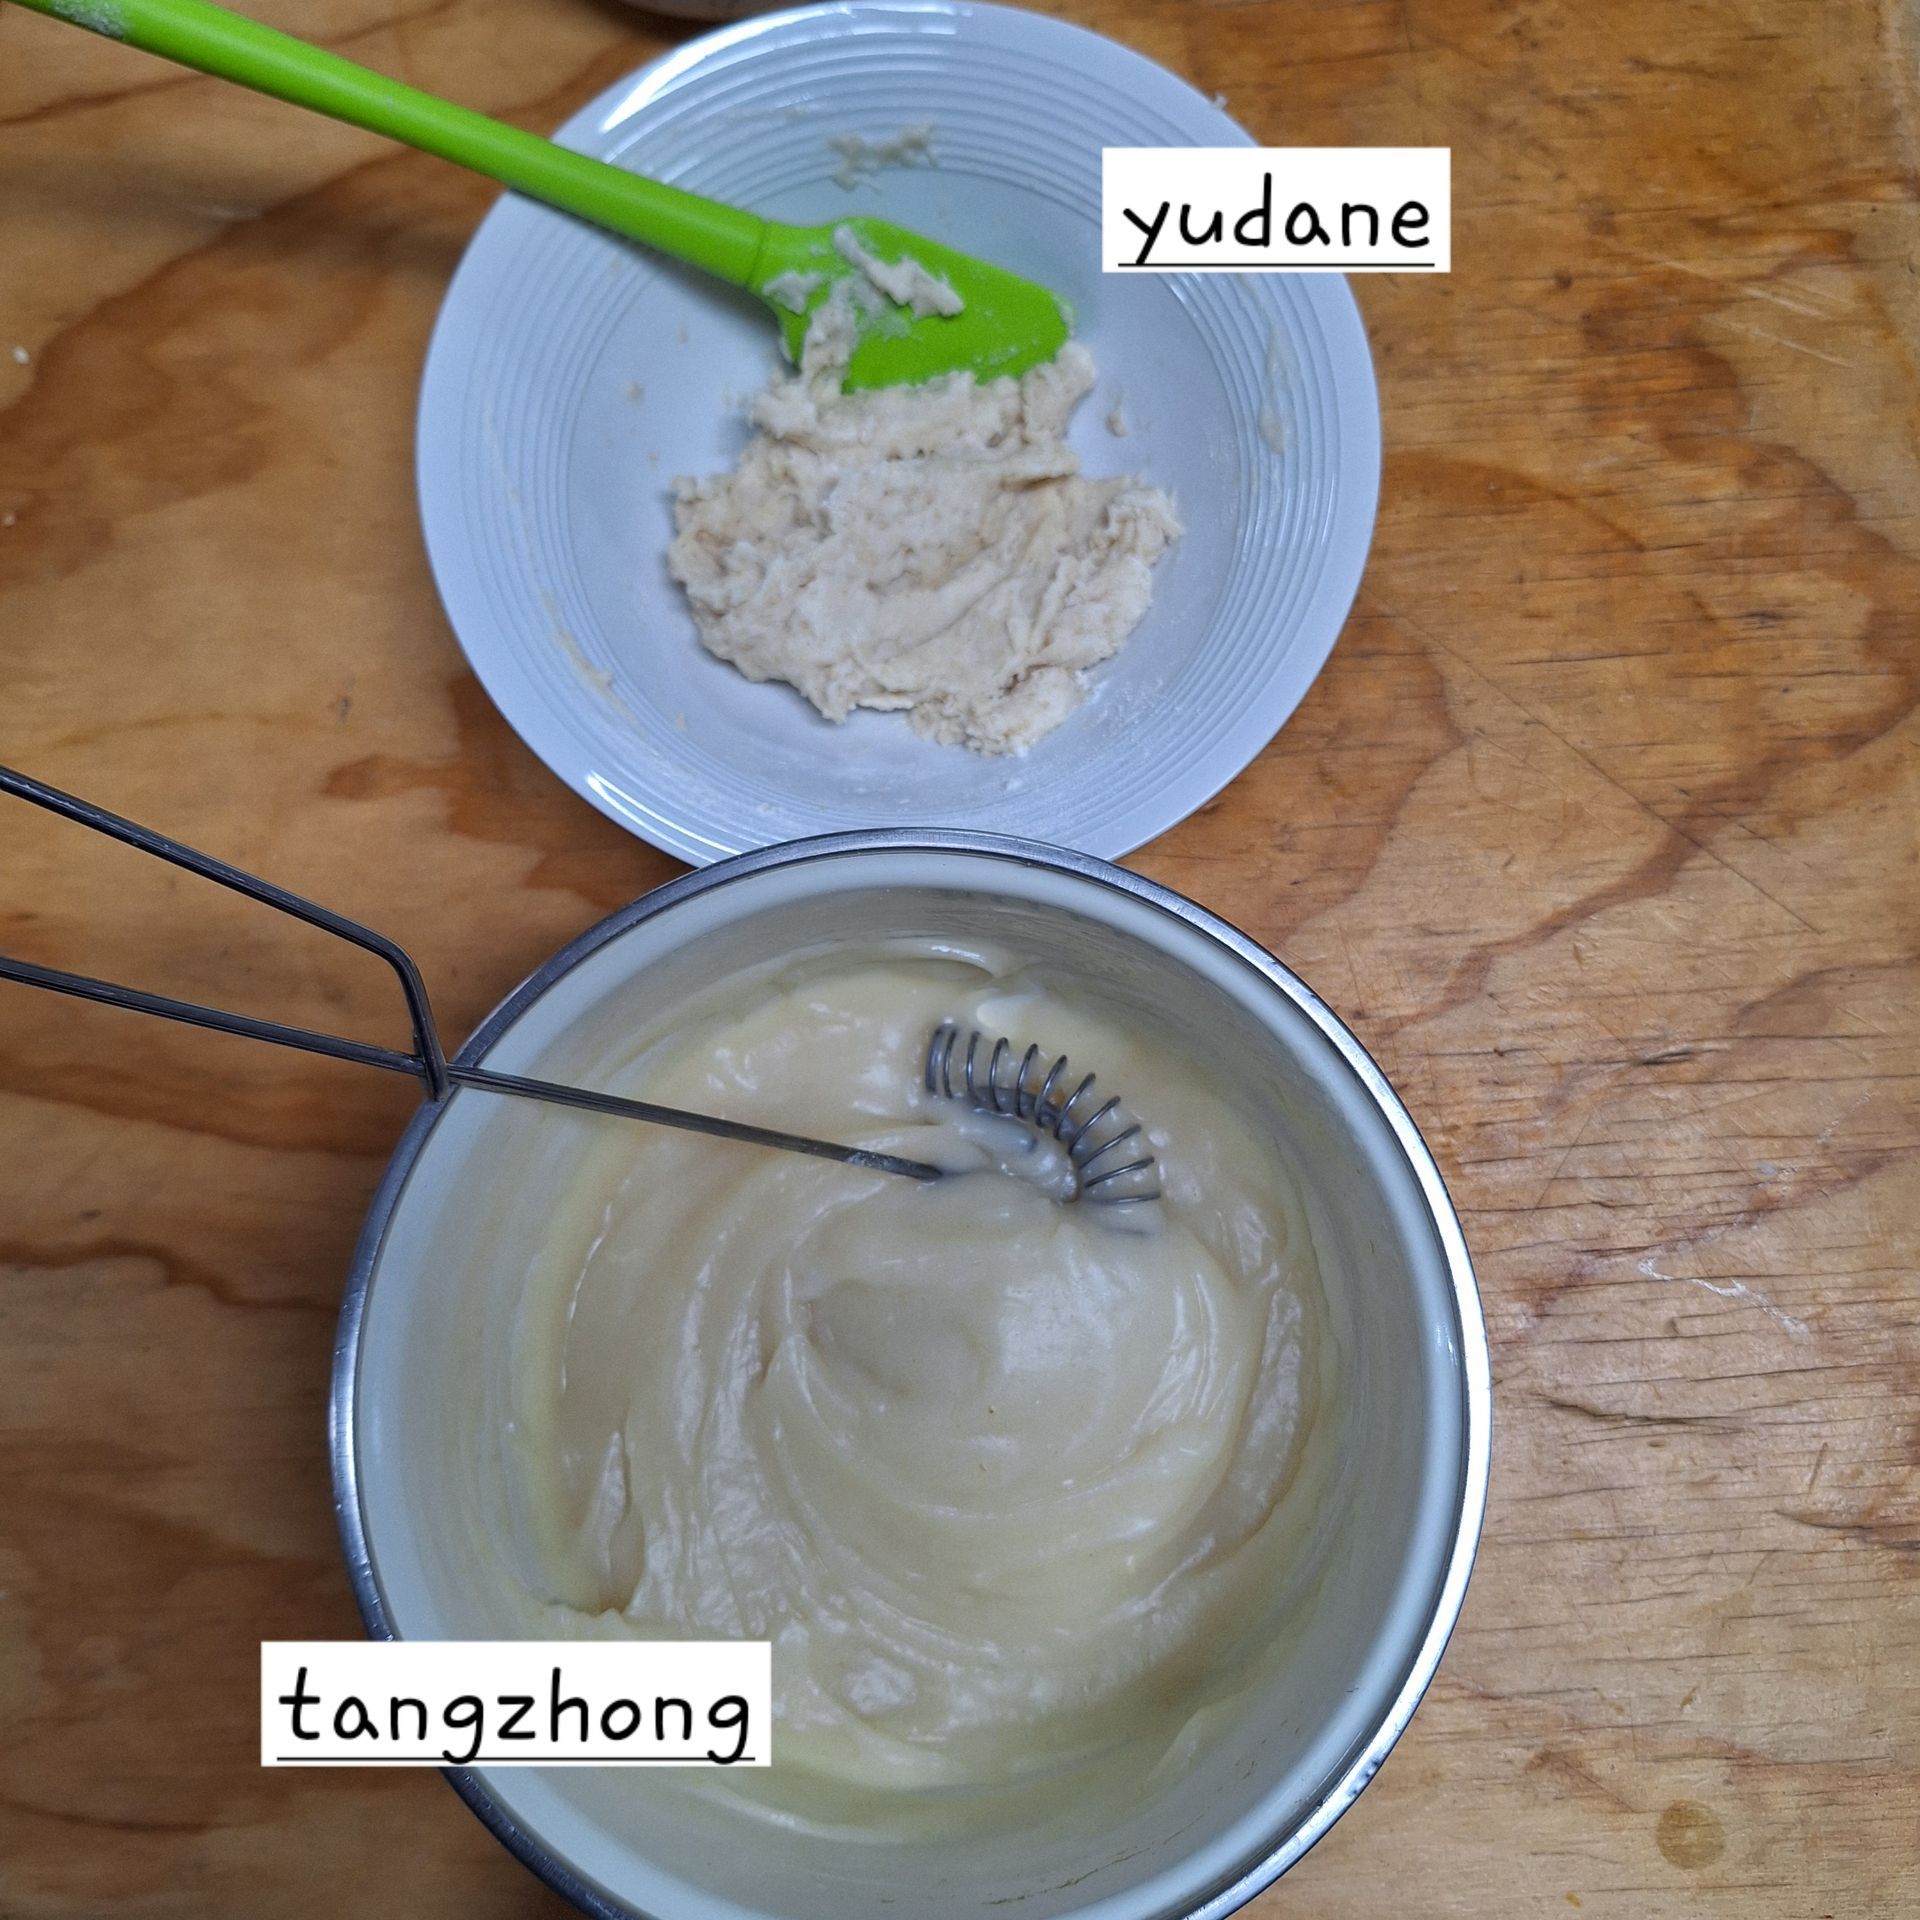 photo showing the difference between a  tangzhong and Yudane